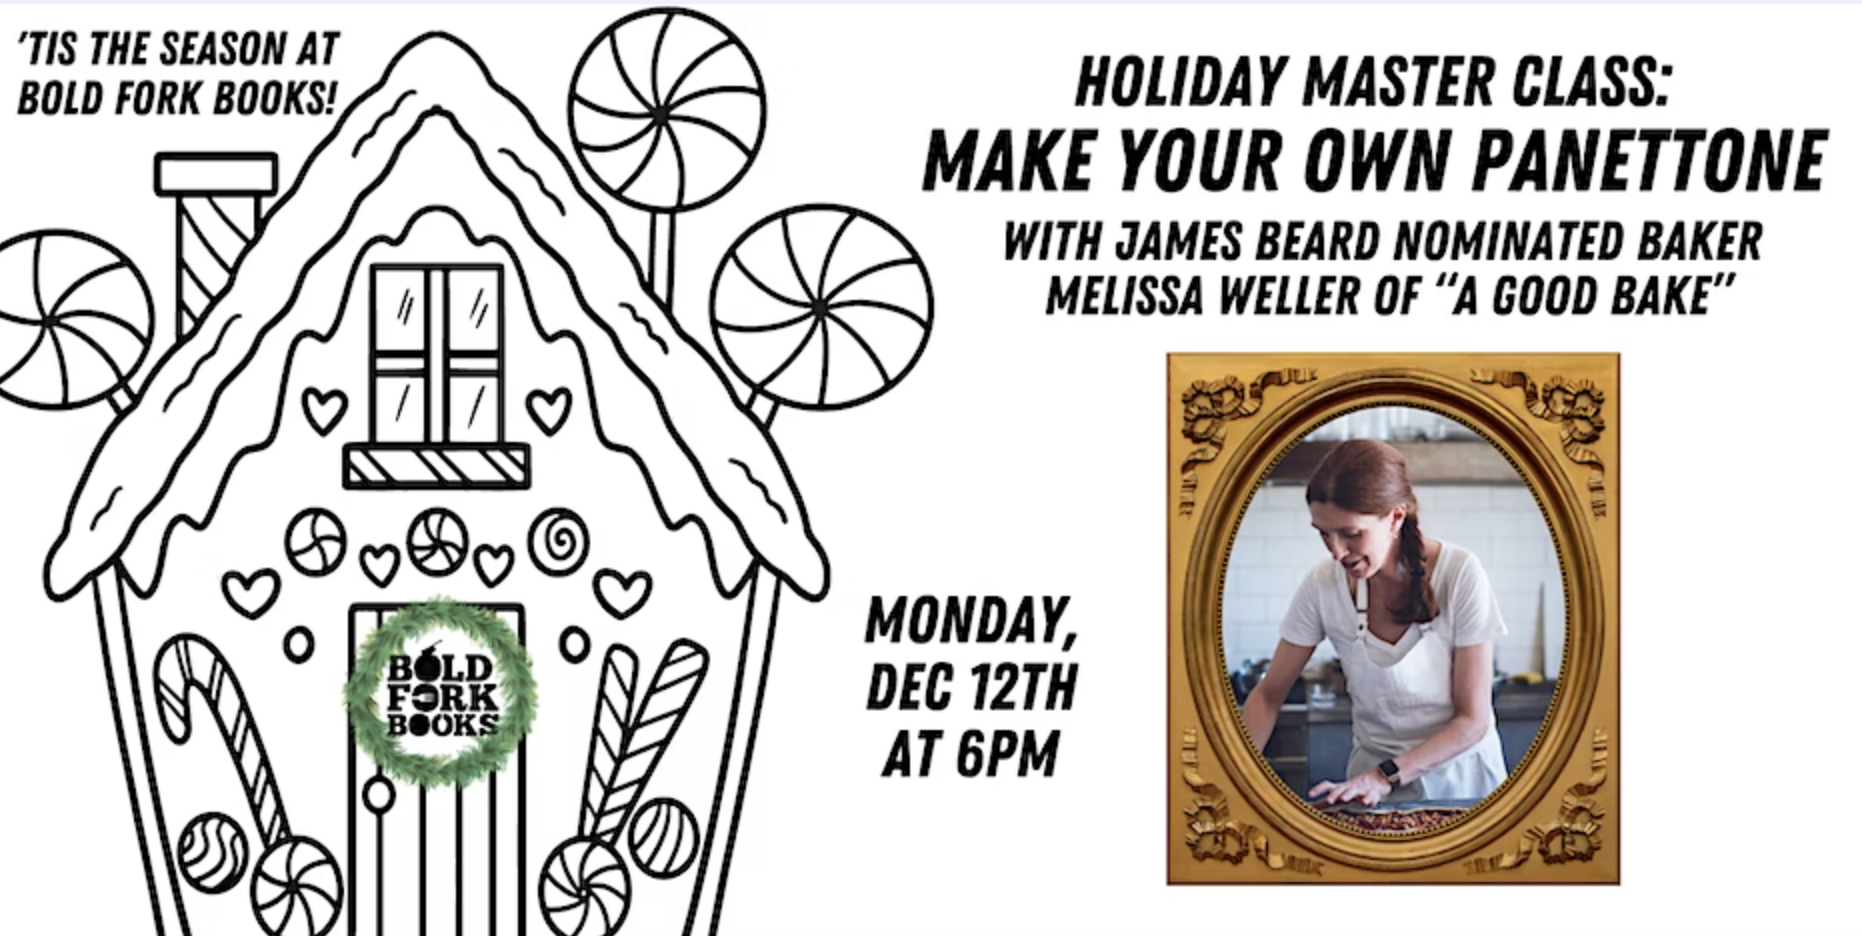 Master Class: Make Your Own Panettone with Melissa Weller